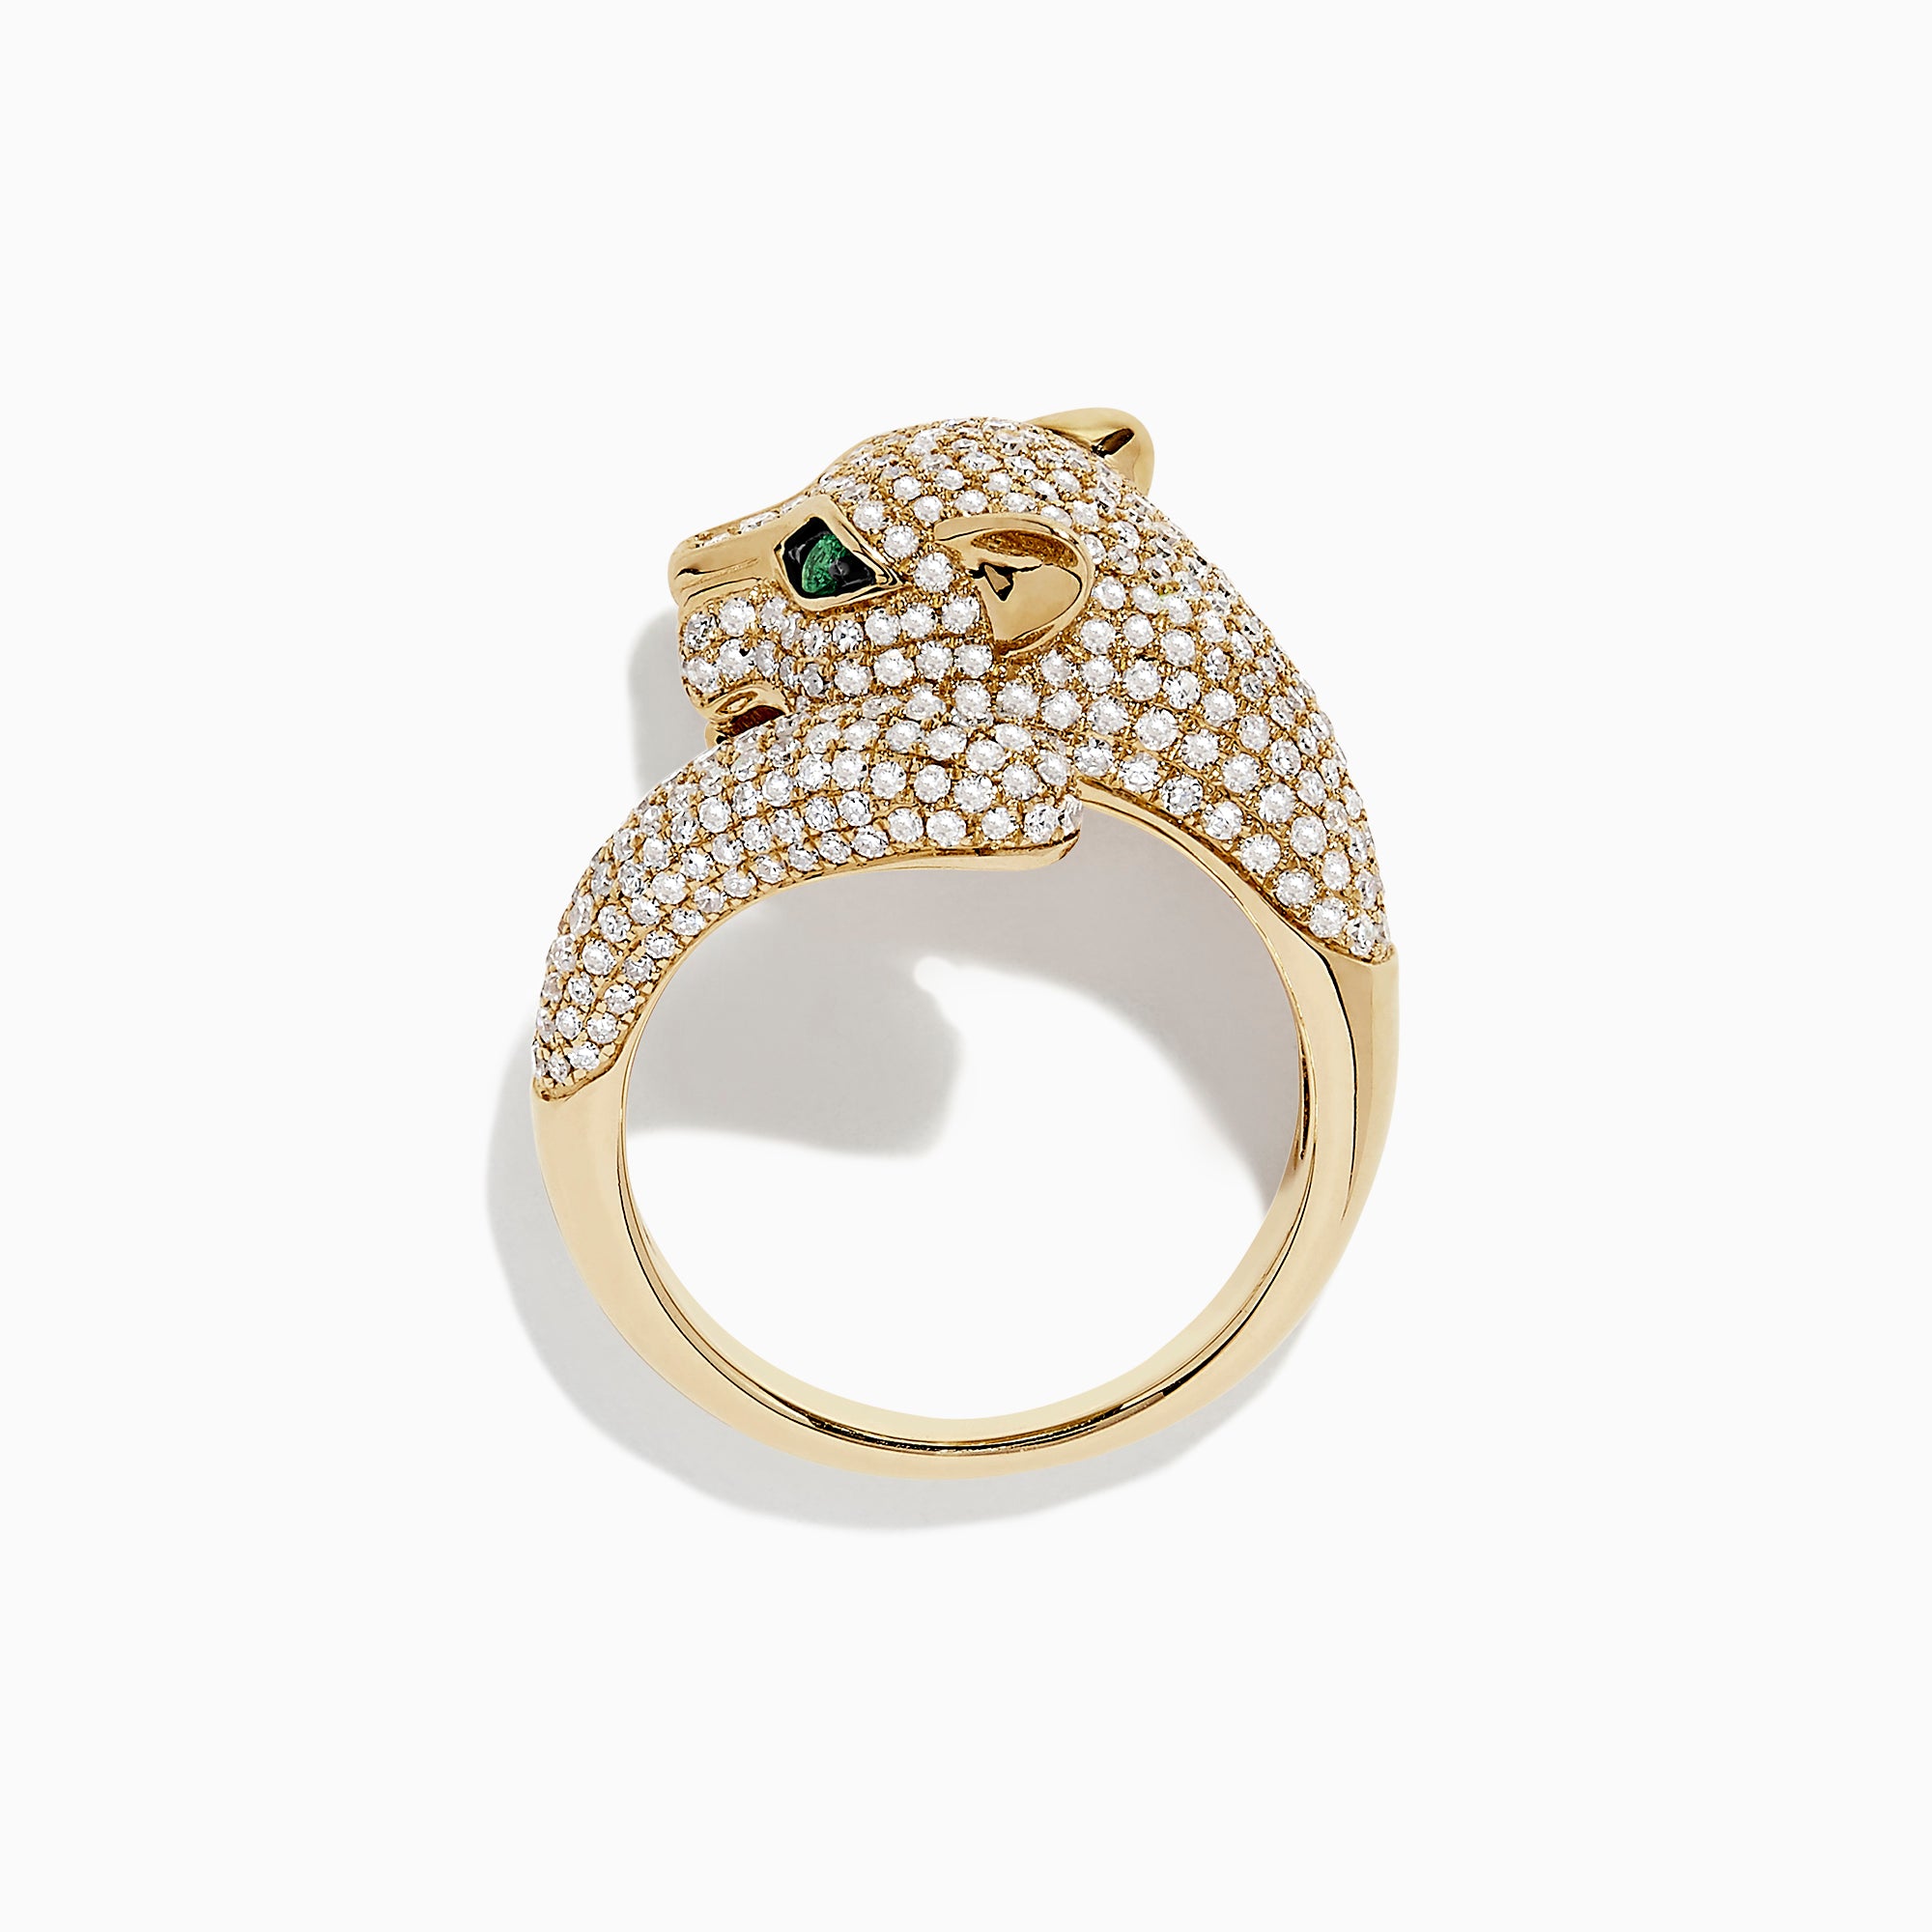 Effy Signature 14K Yellow Gold Diamond and Emerald Panther Ring, 1.43 TCW